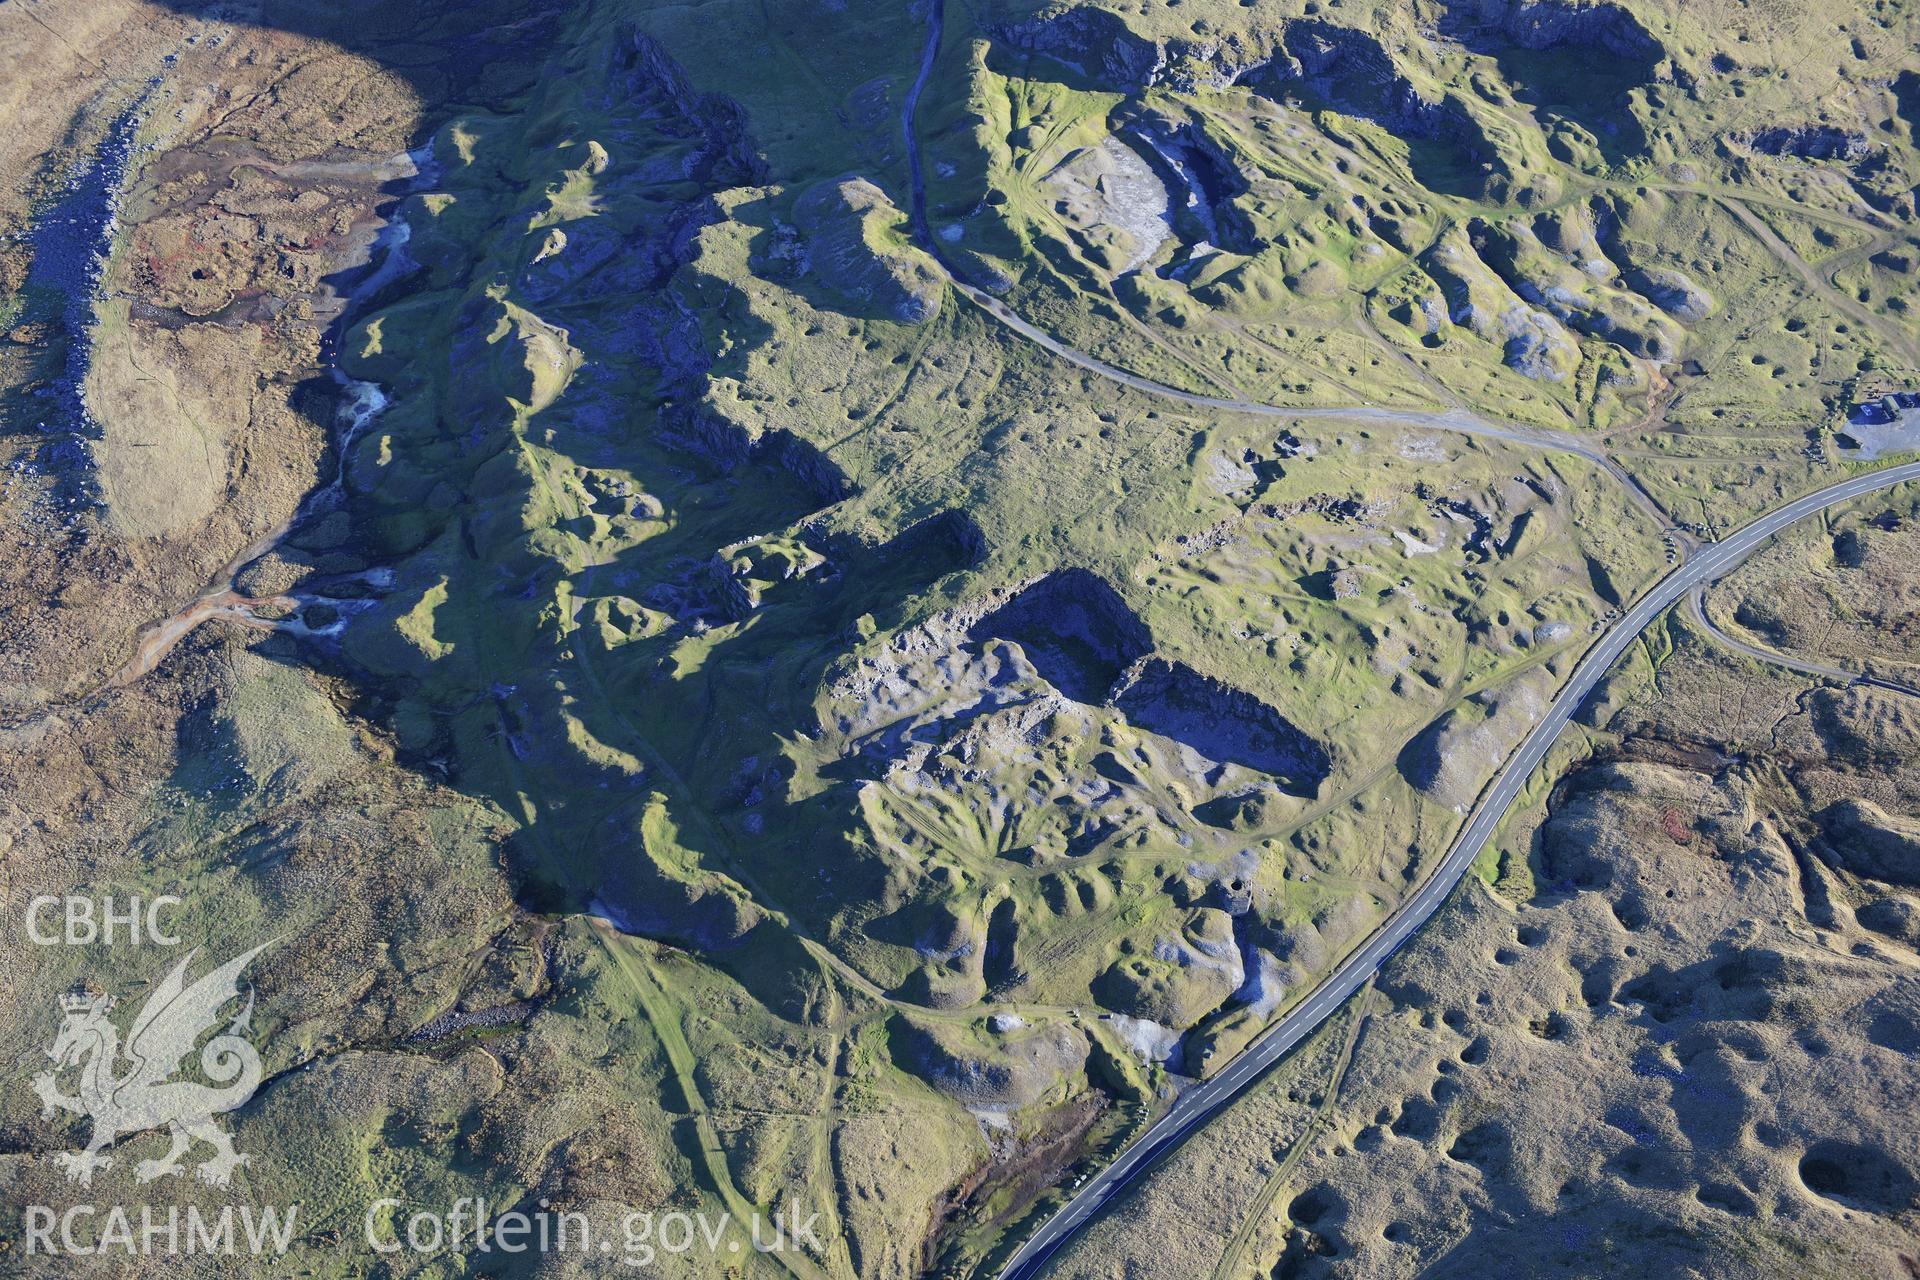 RCAHMW colour oblique photograph of Foel Fawr quarry complex. Taken by Toby Driver on 28/11/2012.